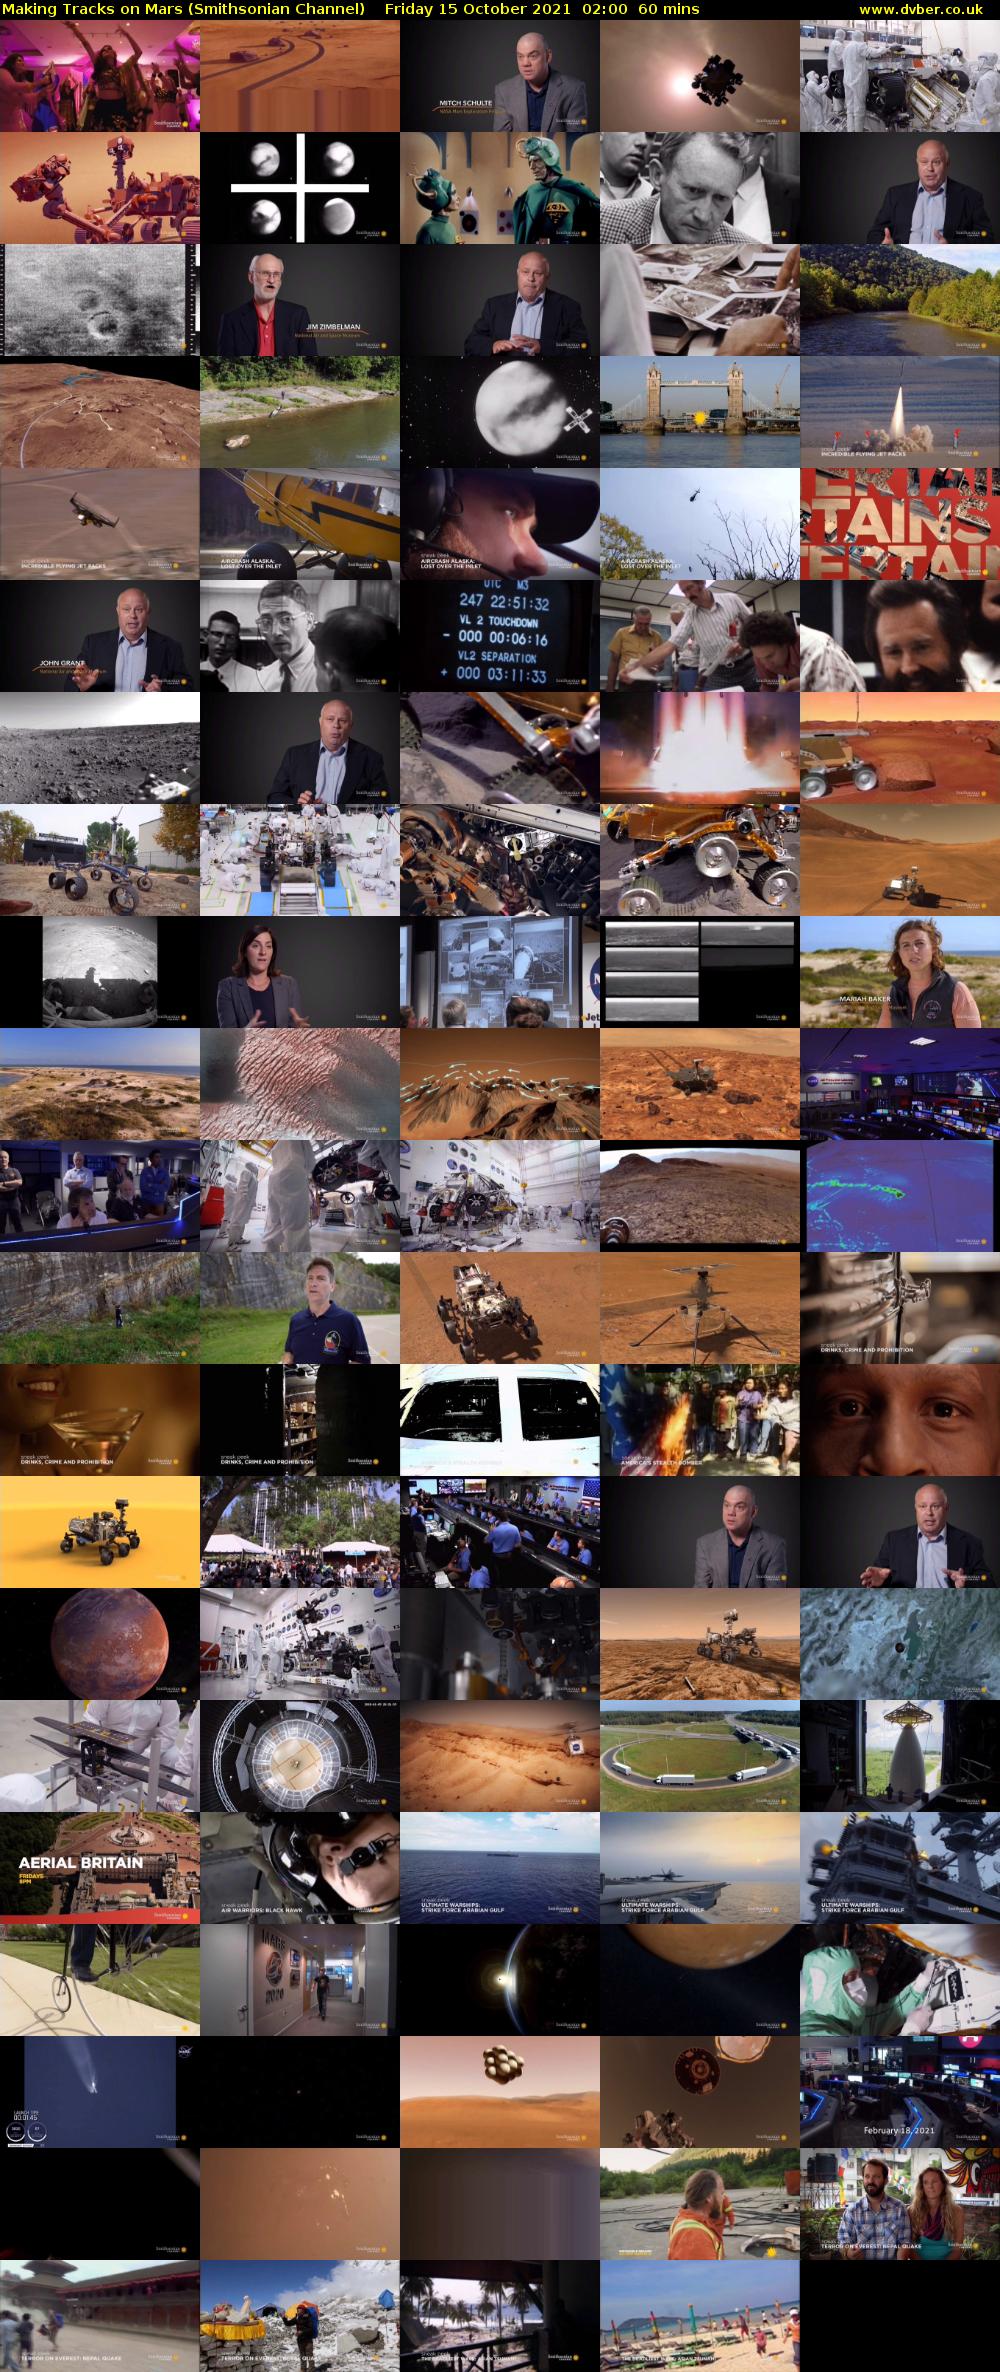 Making Tracks on Mars (Smithsonian Channel) Friday 15 October 2021 02:00 - 03:00